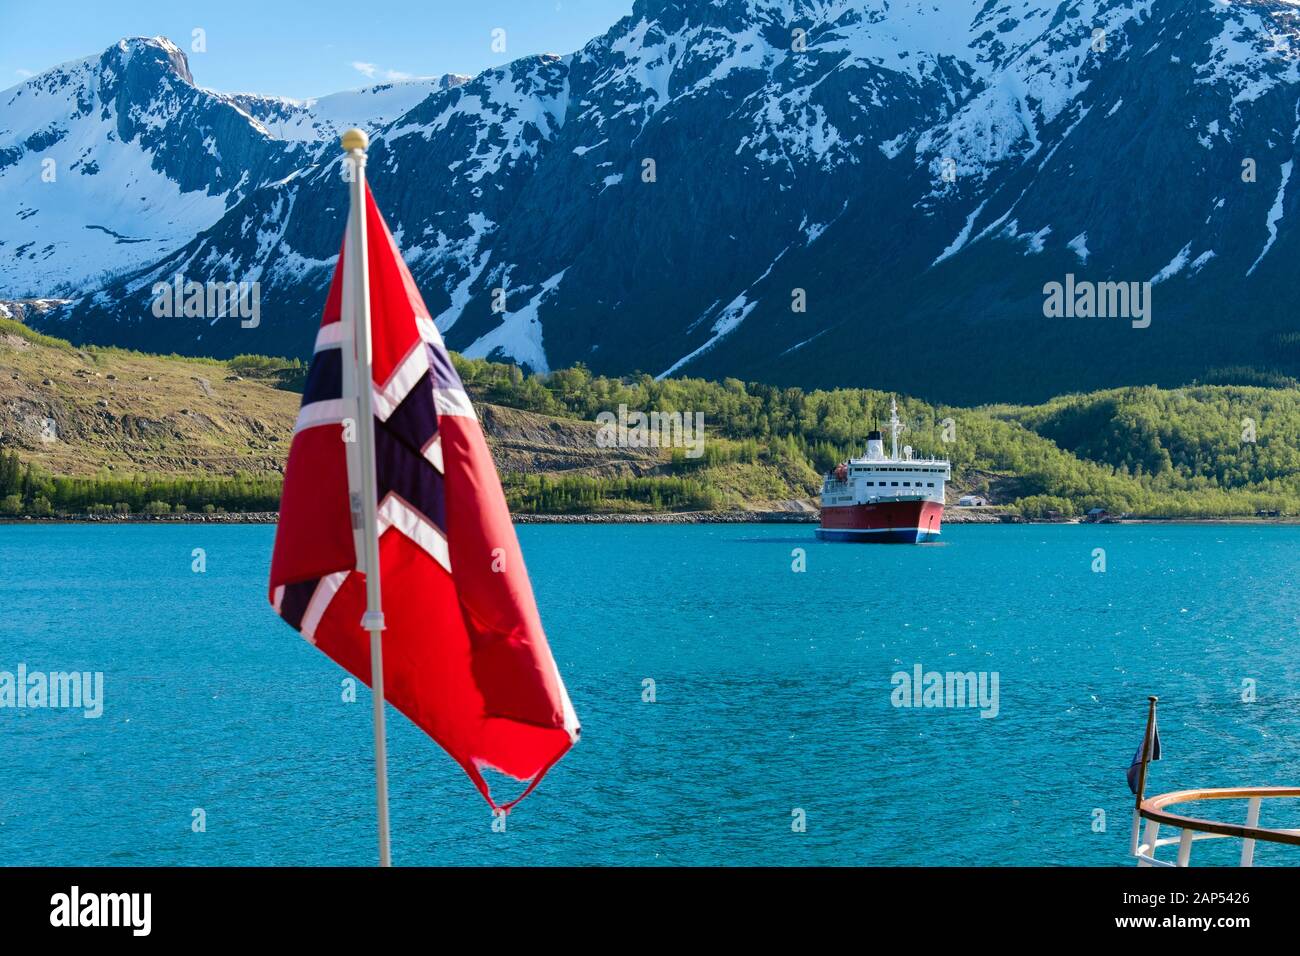 Norwegian flag with G Adventures cruise ship Expedition in Holandsfjorden fjord. Svartisen, Meløy municipality, Helgeland, Nordland, Norway Stock Photo